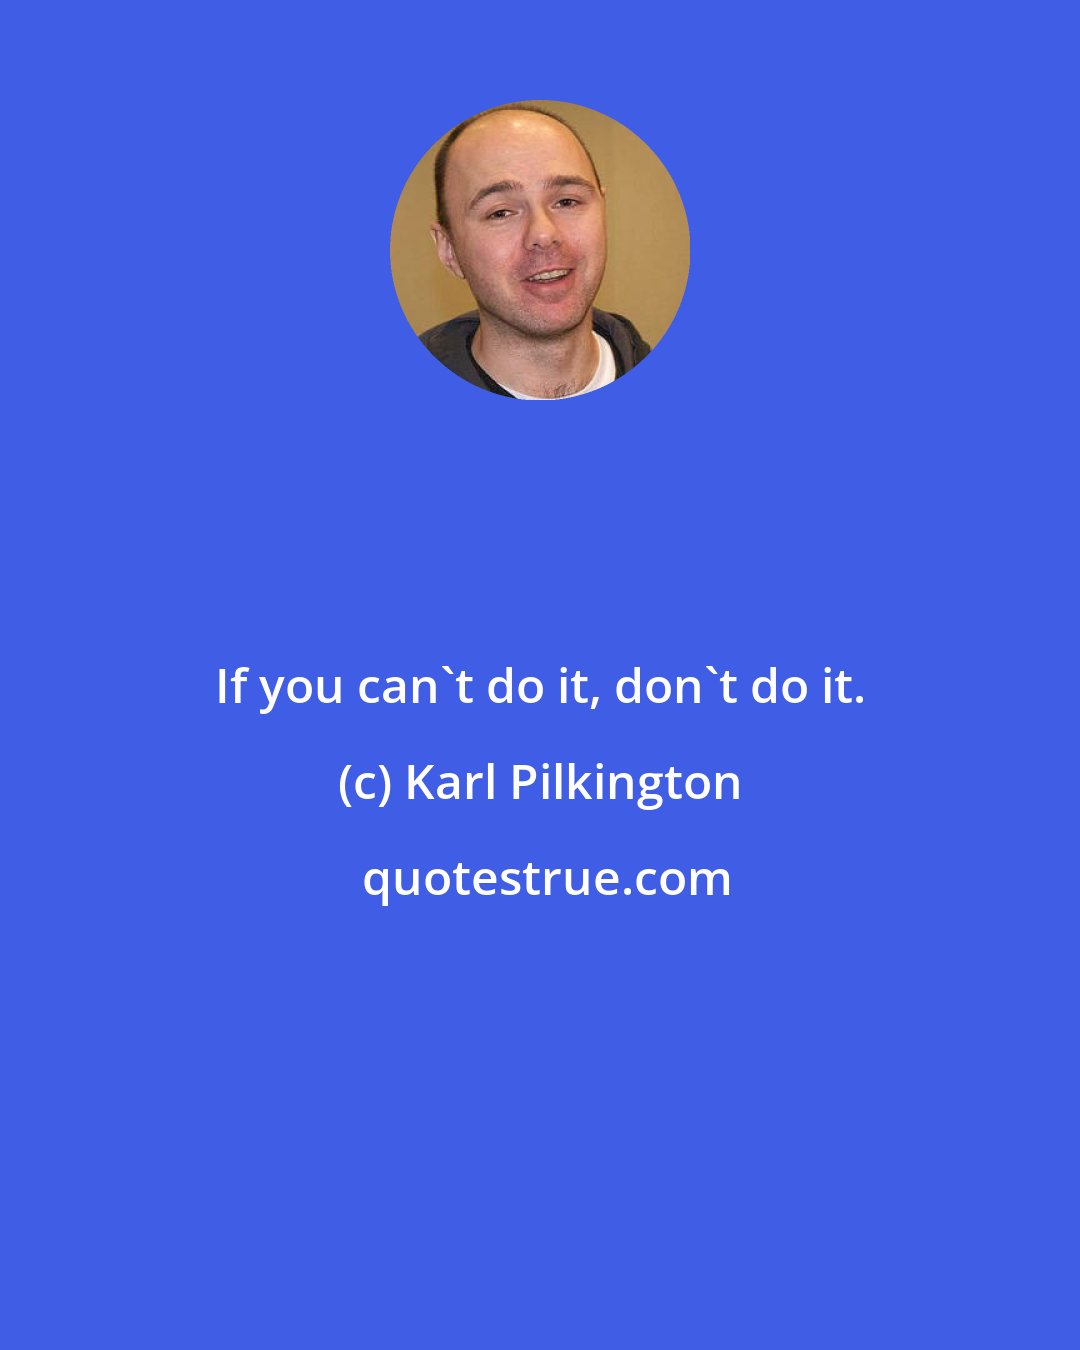 Karl Pilkington: If you can't do it, don't do it.